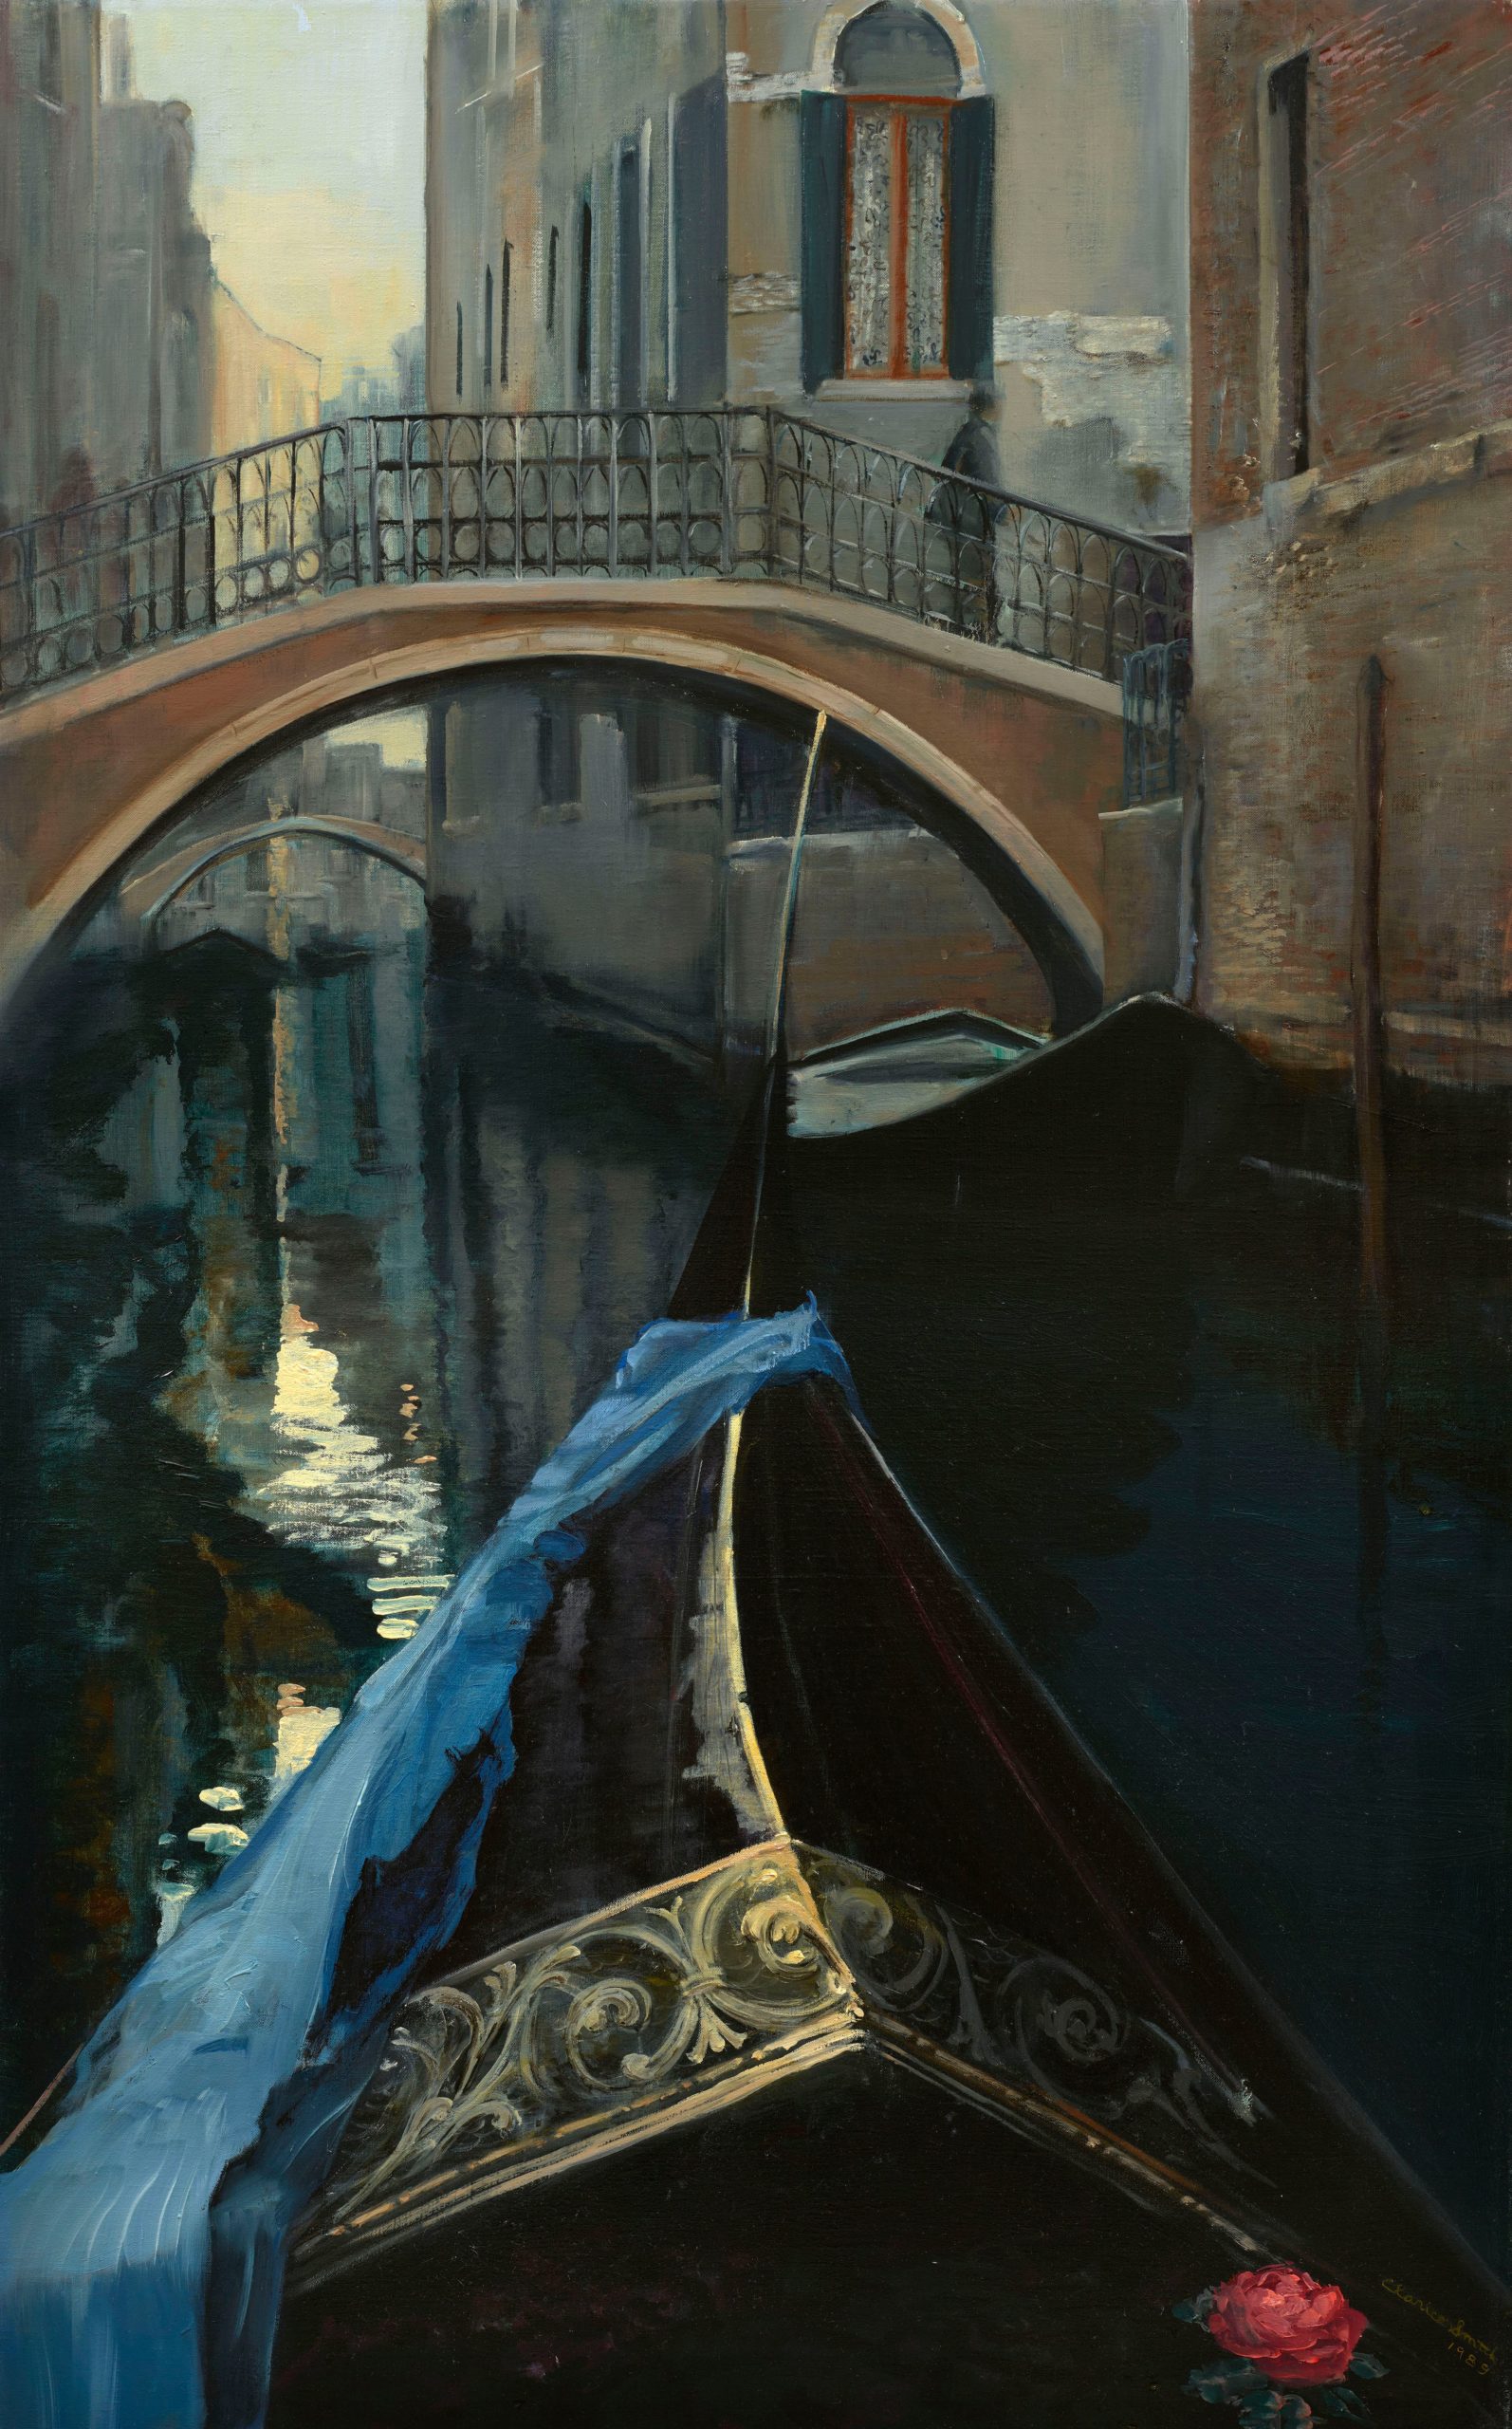 
		                					Clarice Smith		                																	
																											<i>Prow,</i>  
																																								1989, 
																																								oil on canvas, 
																																								48 x 30 inches 
																								
		                				